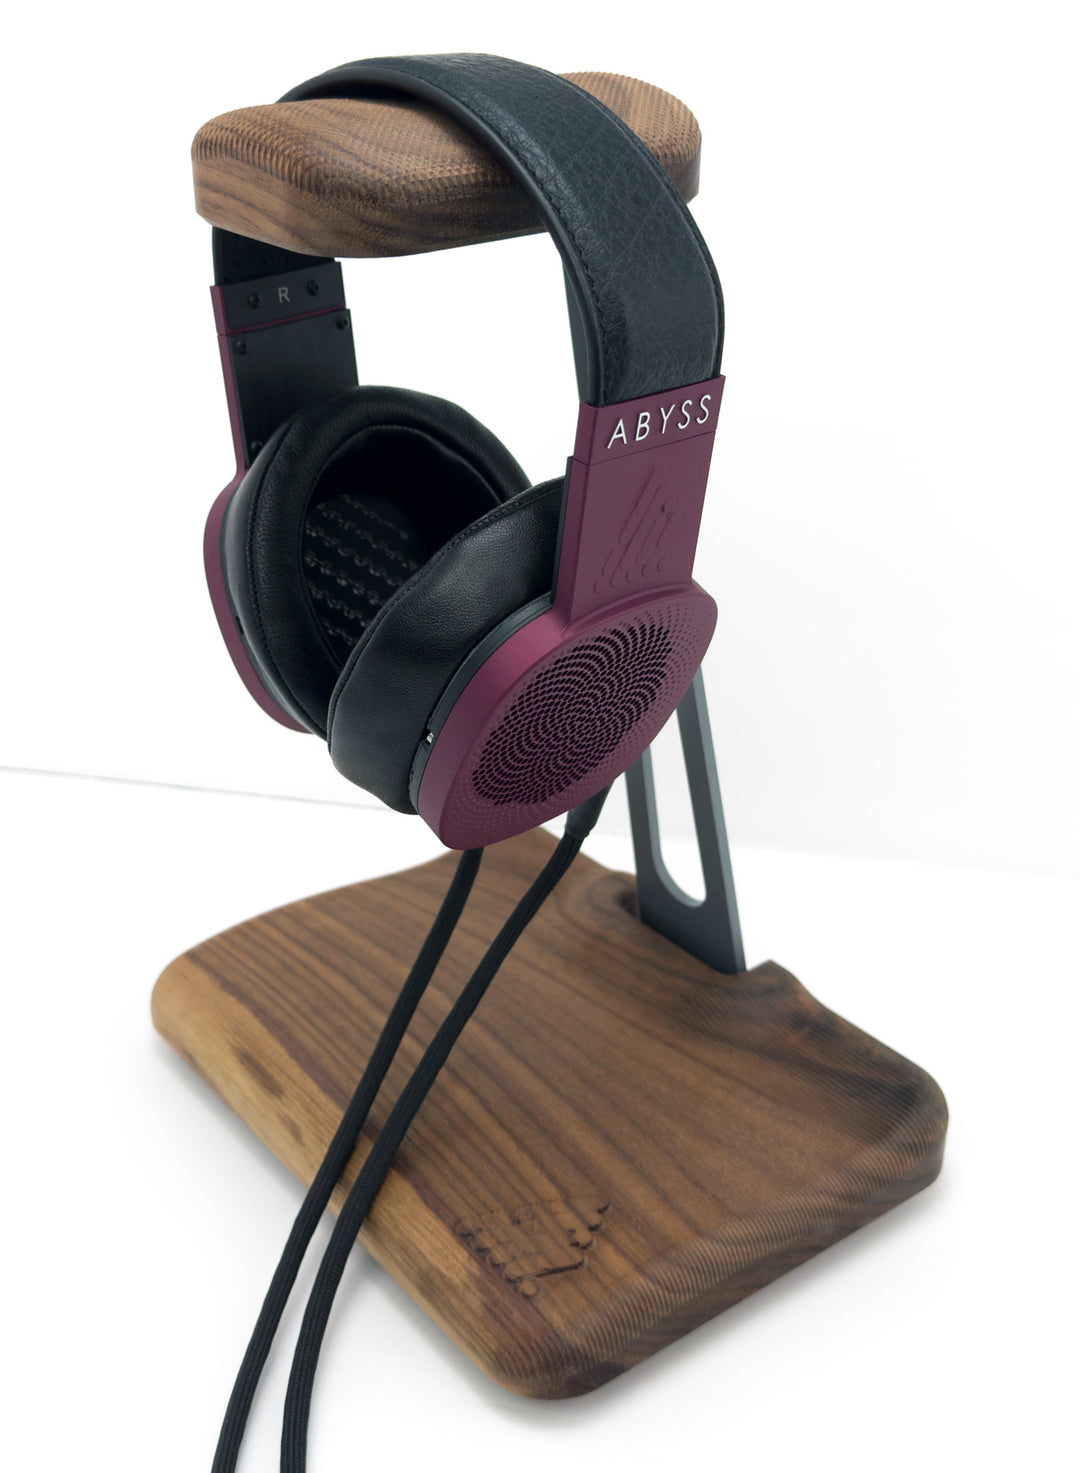 BARU! Headphone STAND by ABYSS